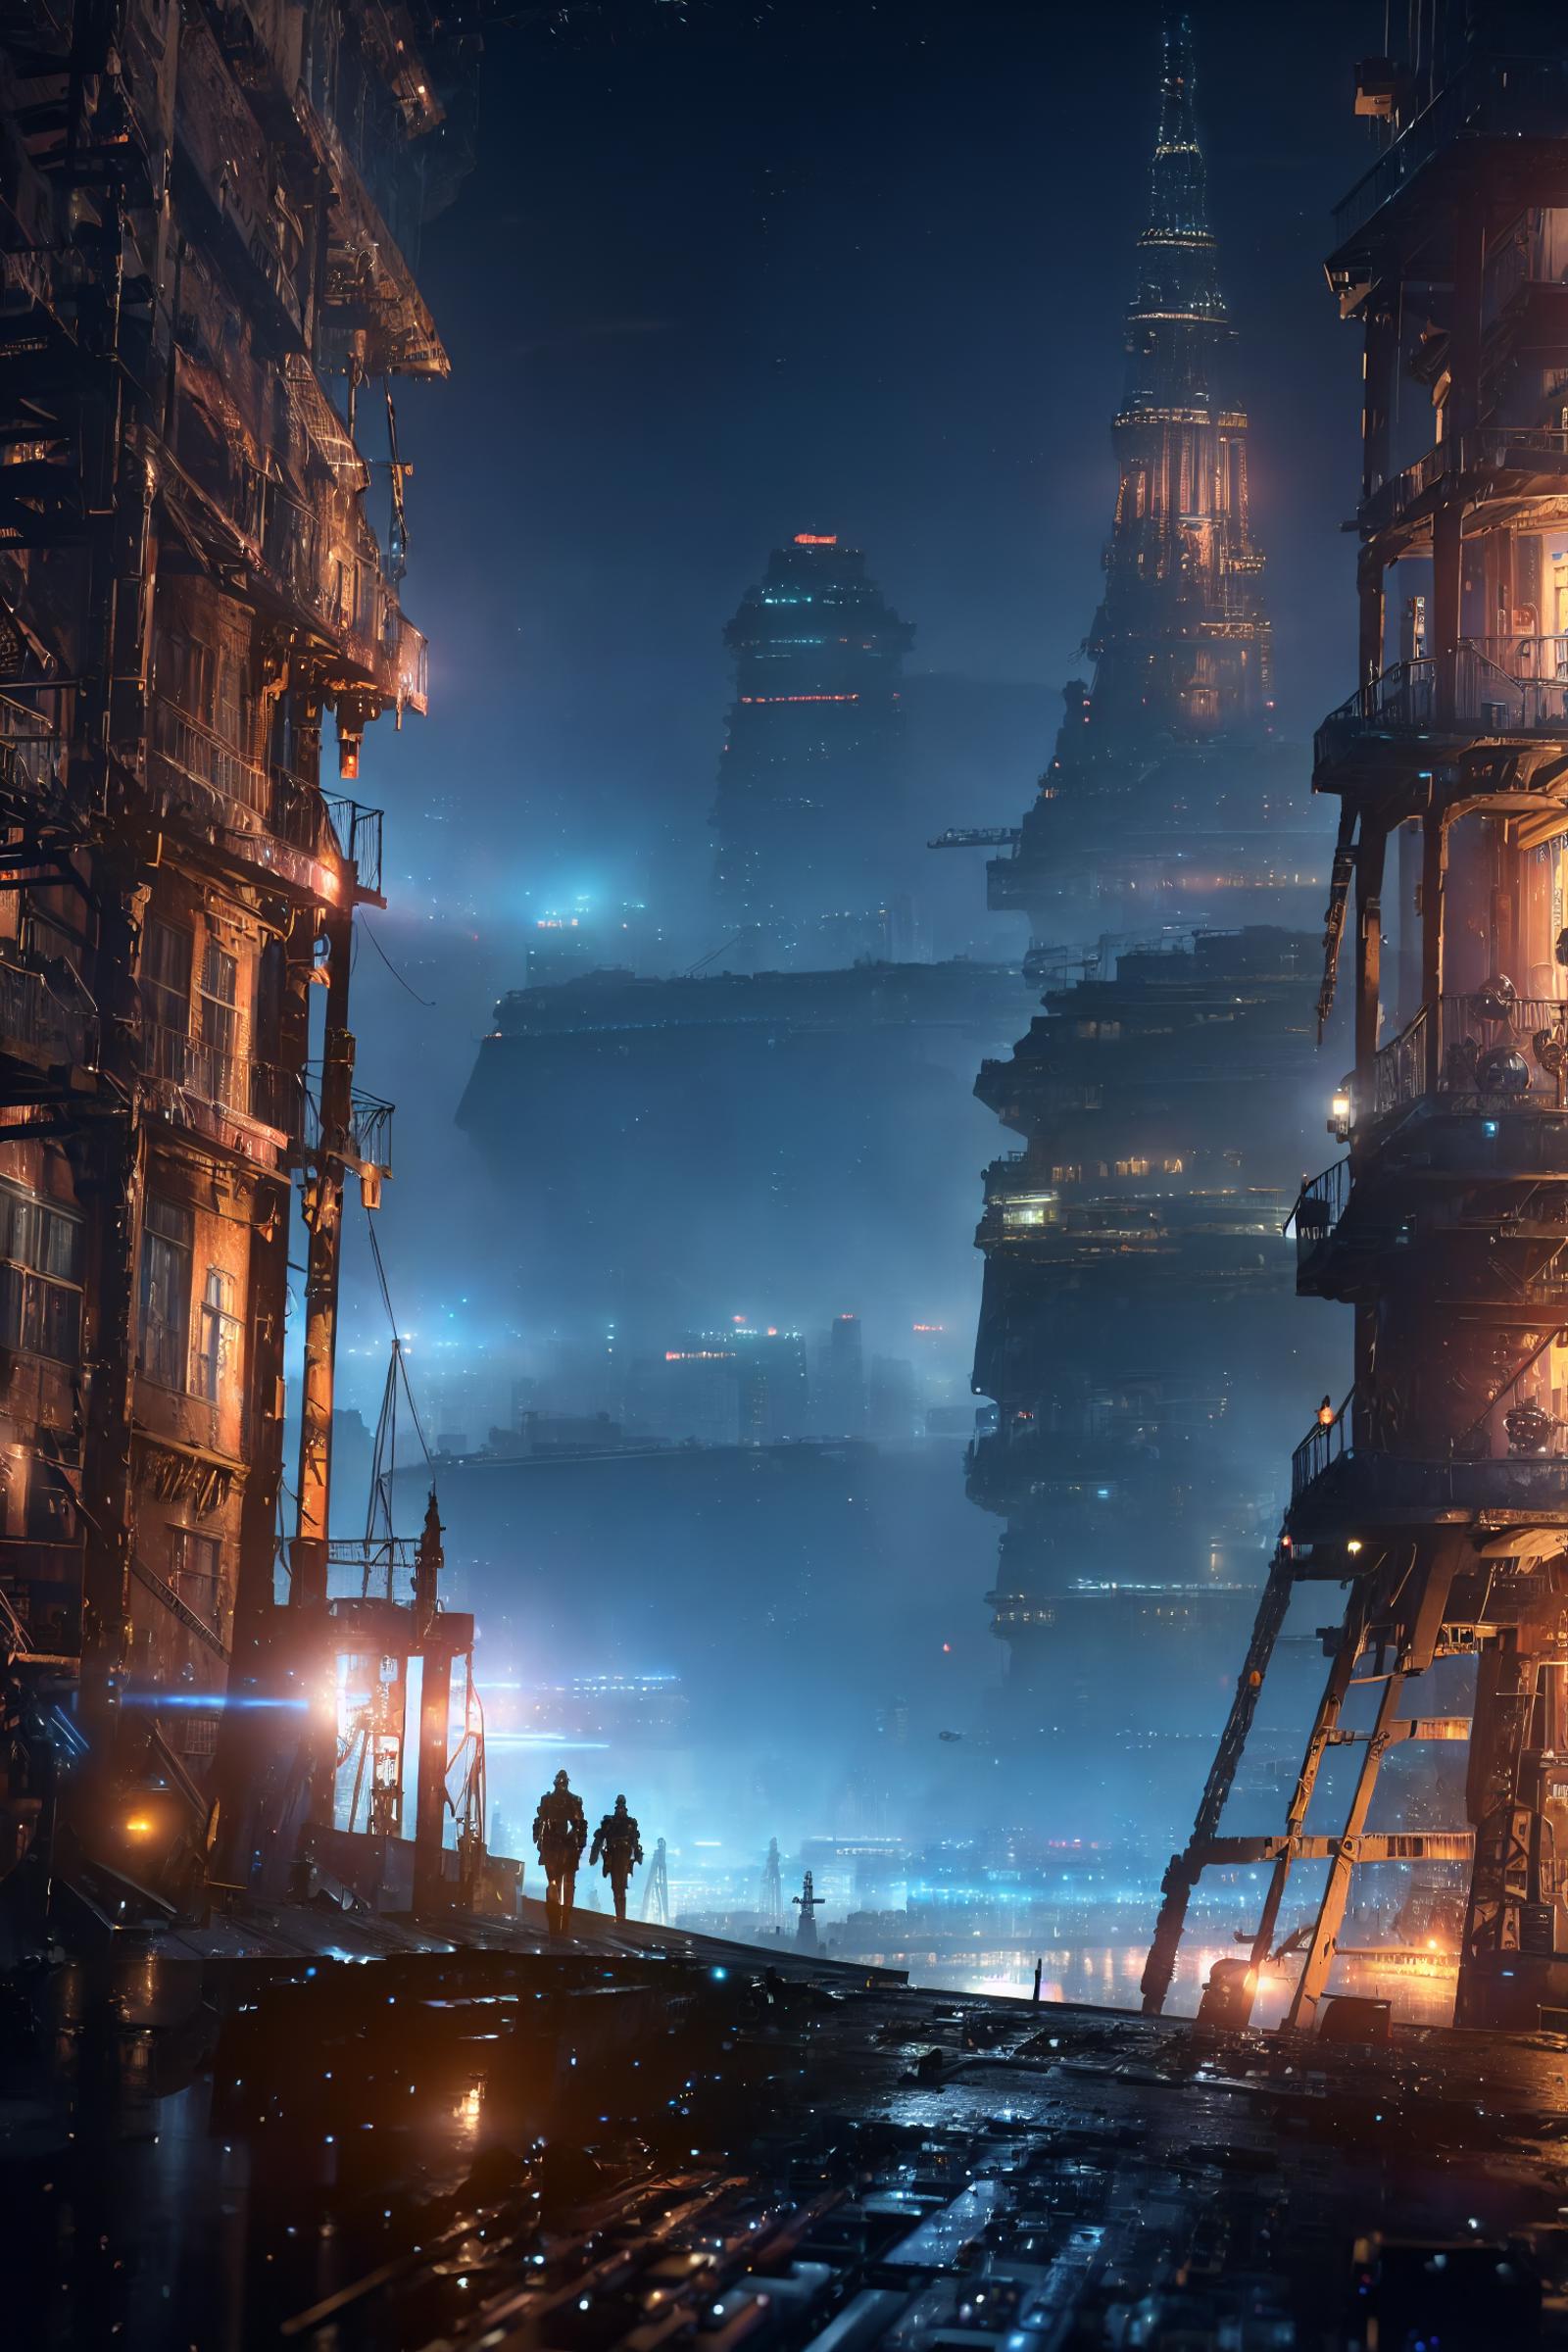 Futuristic Cityscape with Tall Buildings and Two People Walking in the Foggy Night